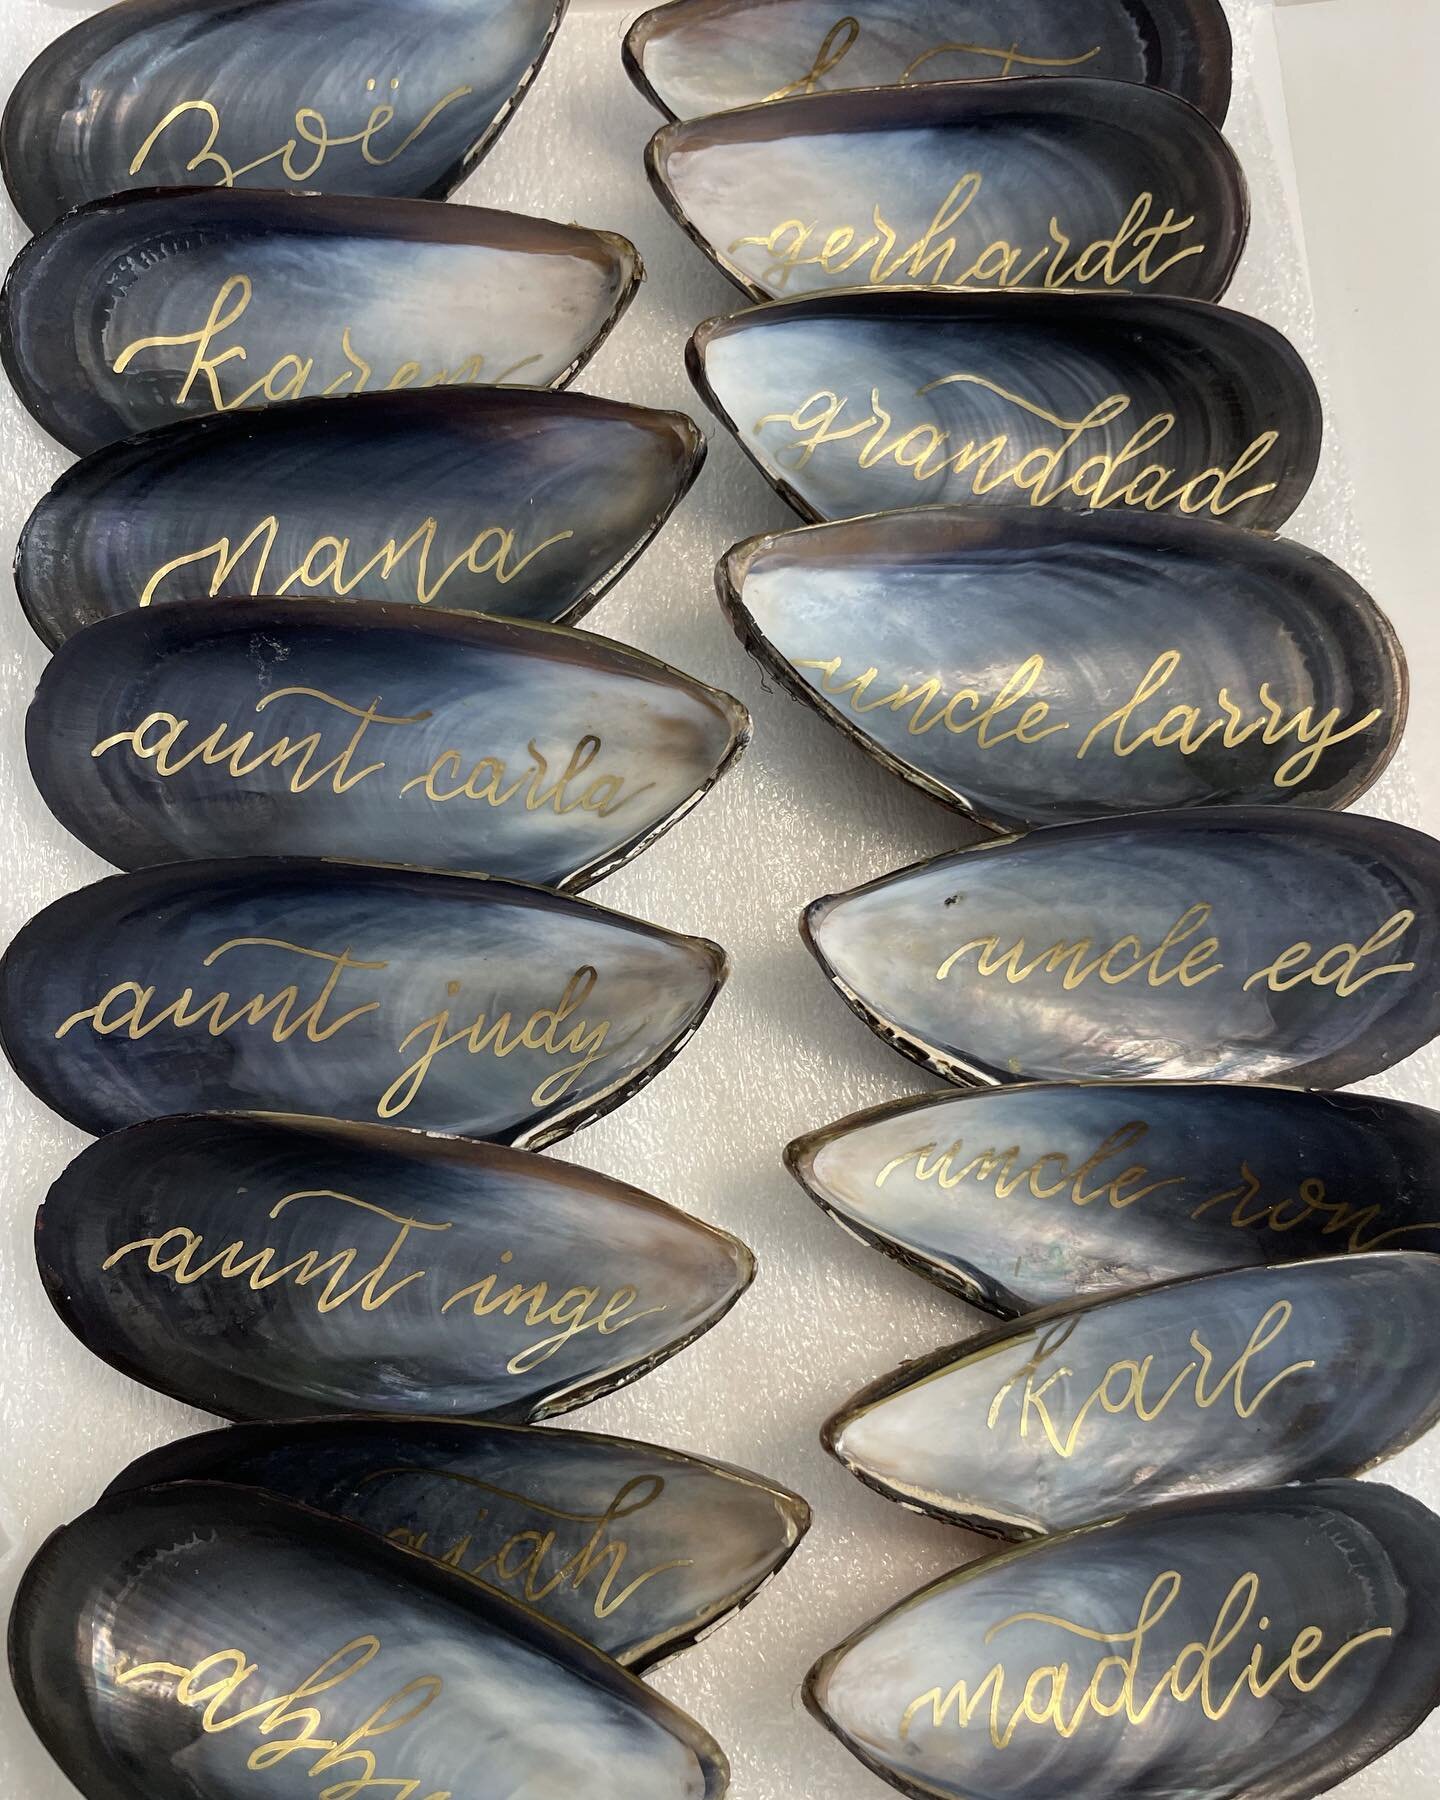 Sometimes, the final product is just so mesmerizing to look at. The shells just have a natural beauty.

#Calligraphy #placecards #paintpens #decocolor #personalized #musselshell #onthedock #onthebeach #beachtime #handwritten #seashells #gold #wedding